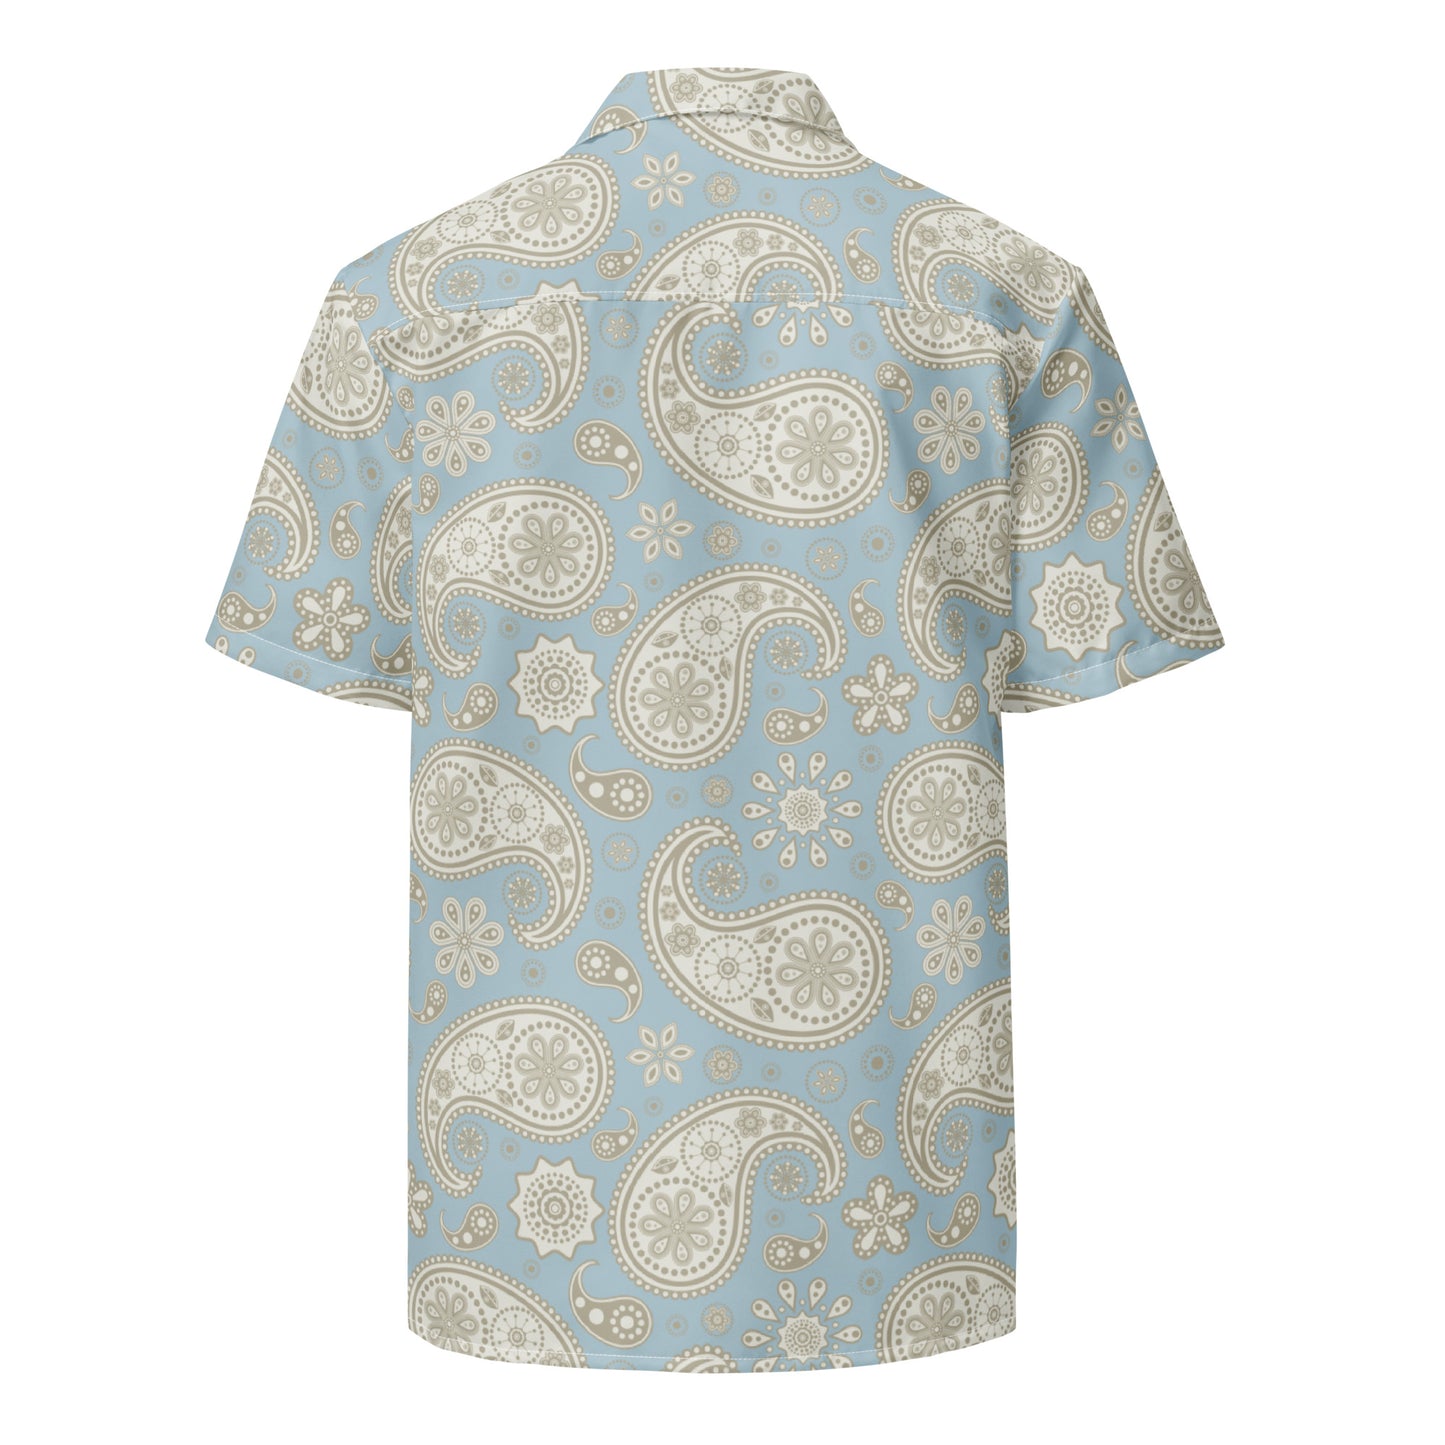 Exclusive Paisley Yacht Club Performance Button Down Shirt - Brinks Island Collection